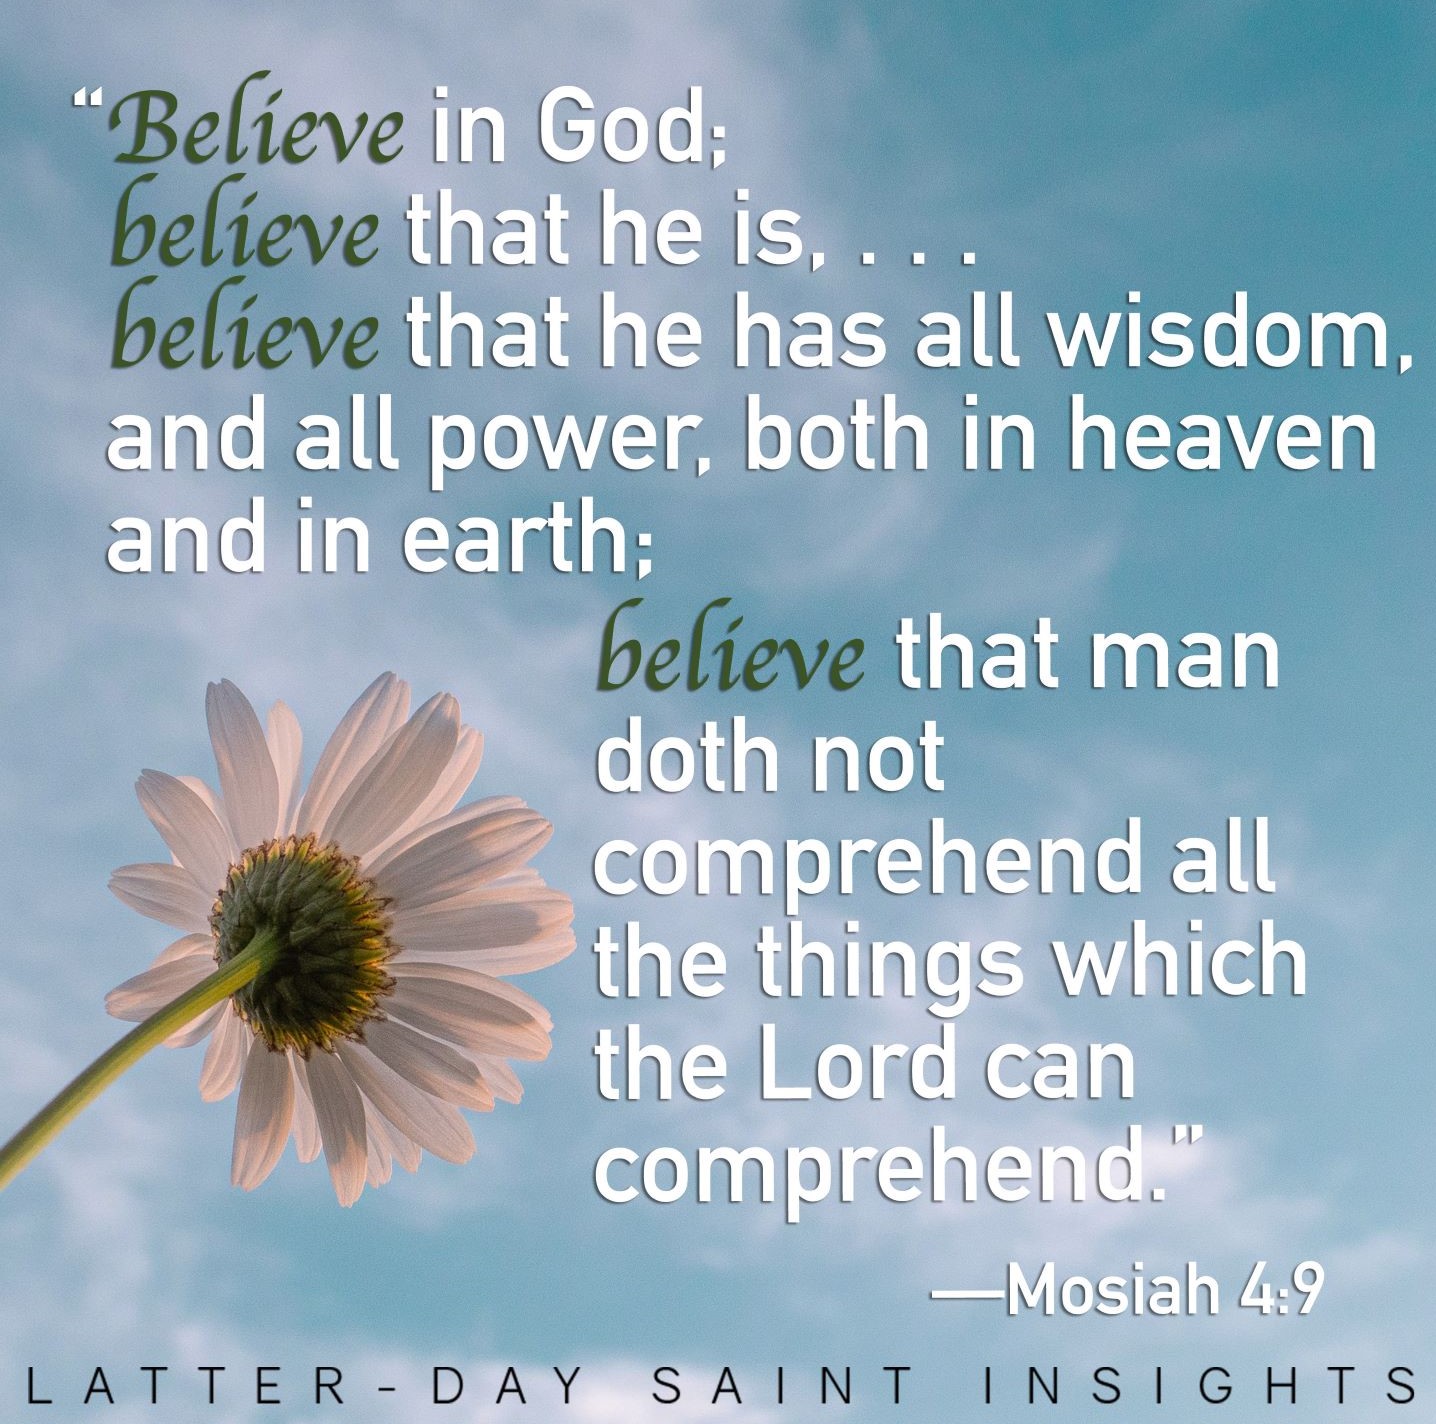 "Believe in God; believe that he is, . . . believe that he has all wisdom and all power, both in heaven and in earth; believe that man doth not comprehend all the things which the Lord can comprehend." —Mosiah 4:9